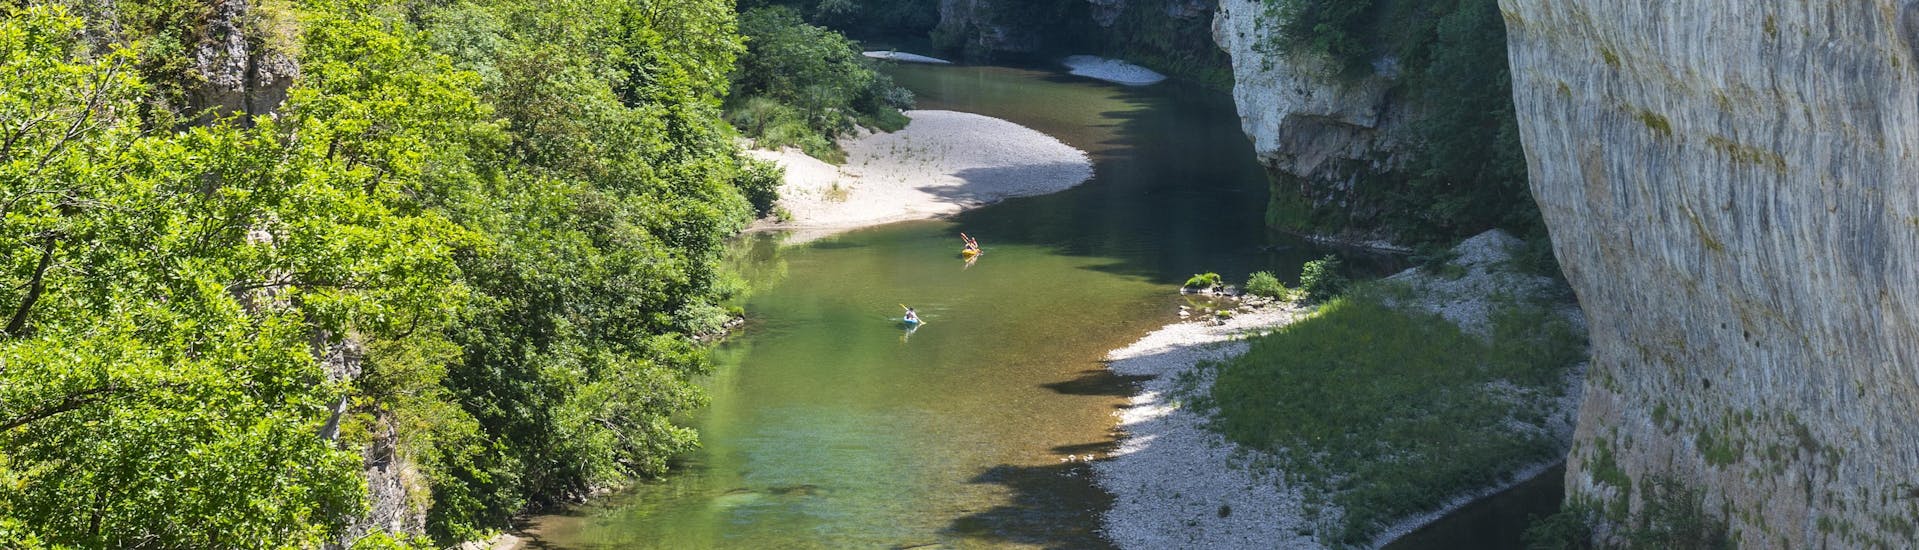 Holidaymakers are canoeing in the middle of the impressive gorges of the Tarn in France, starting from La Malène.